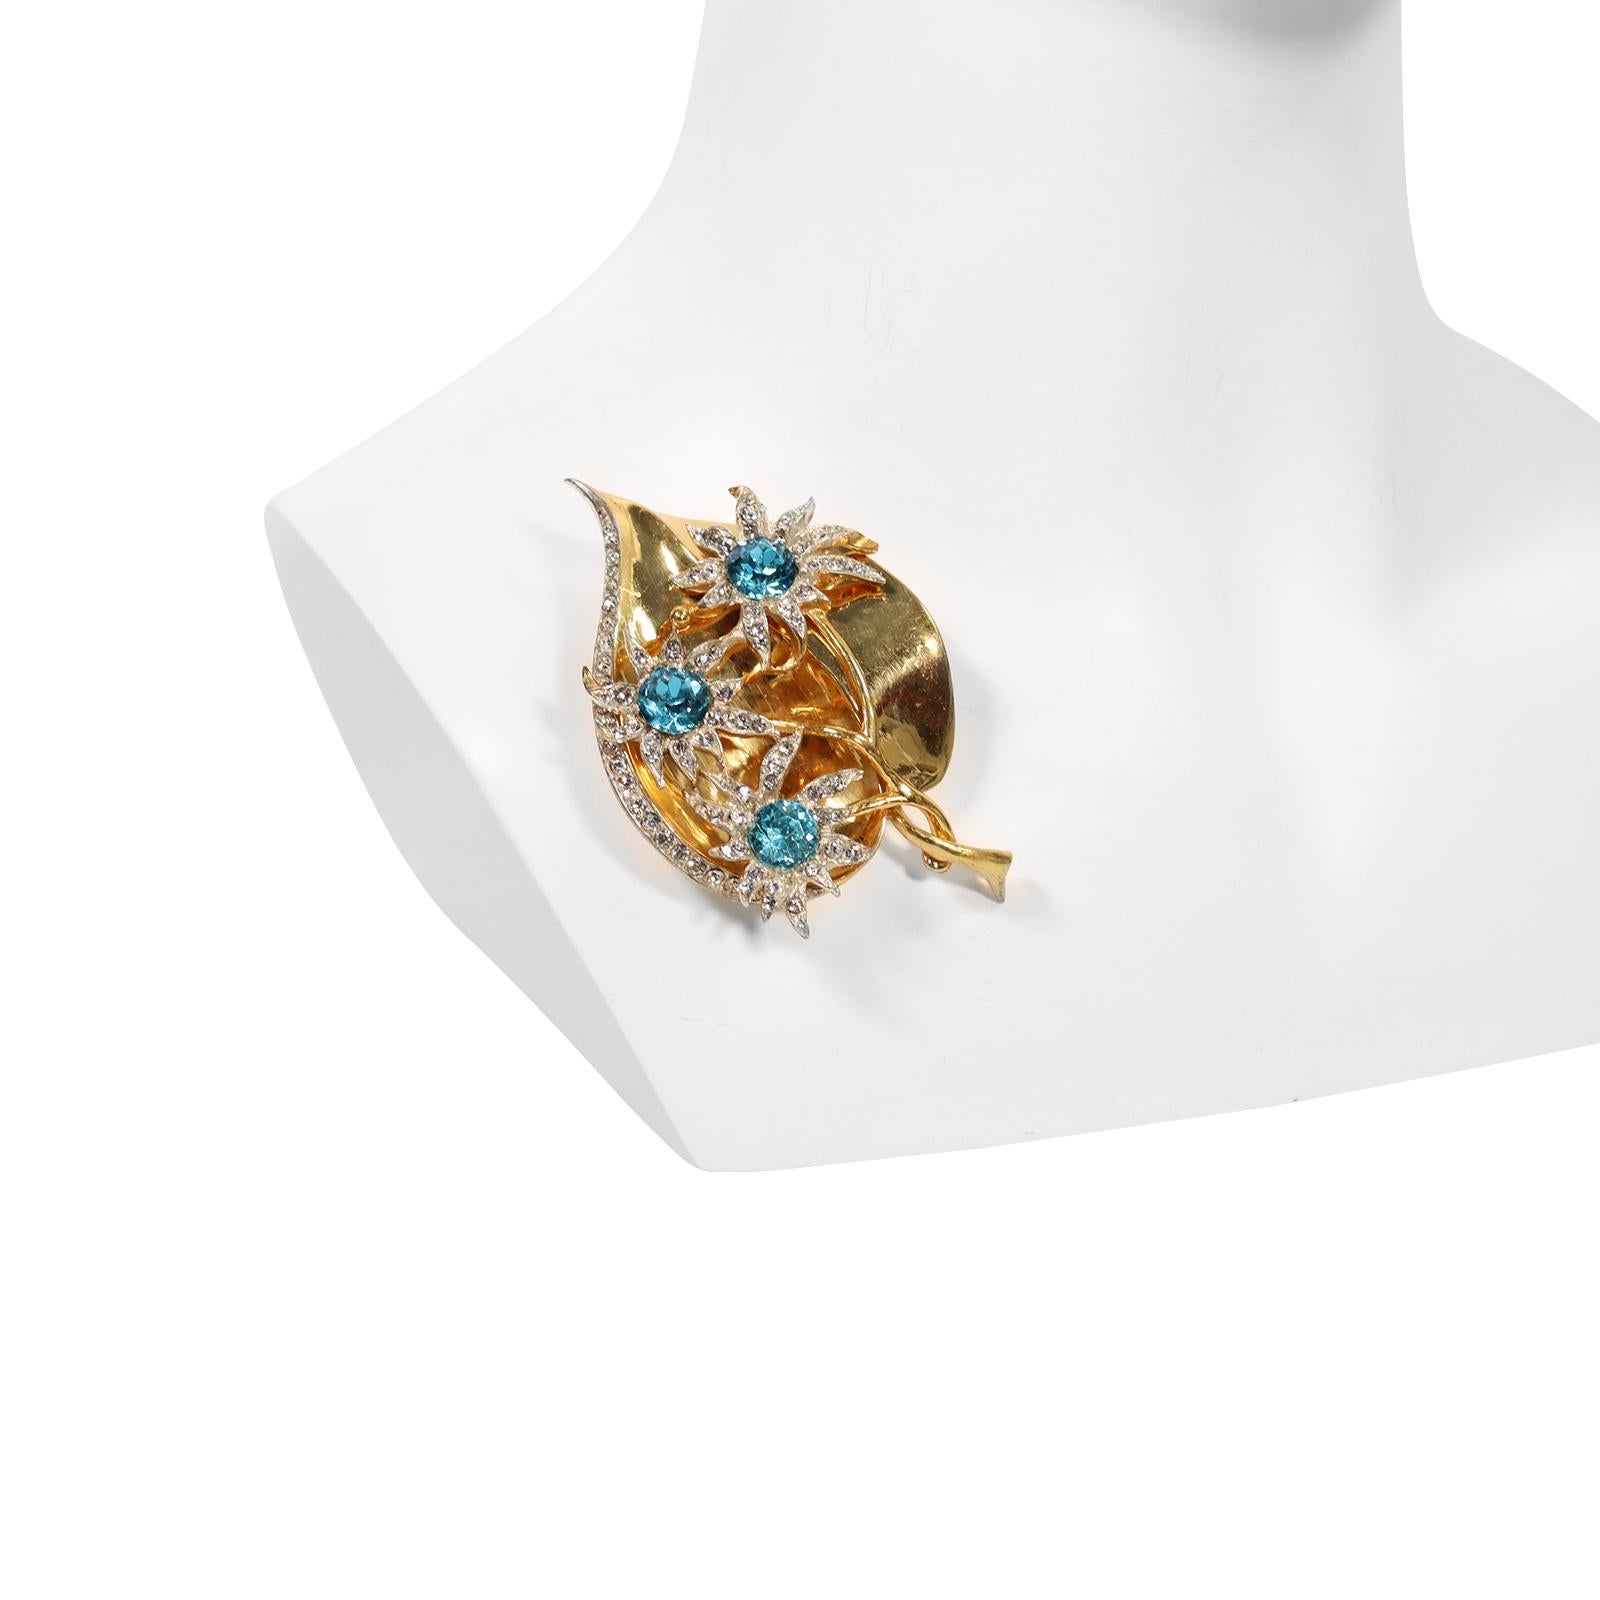 Vintage Coro Craft Sterling  Gold Leaf Brooch with Flowers Circa 1940s. Leaf with Elevated Branches of flowers in Aquamarine Colors and Clear Crystals. This brooch is truly spectacular and though it is from the 1940s it has a very modern look at the